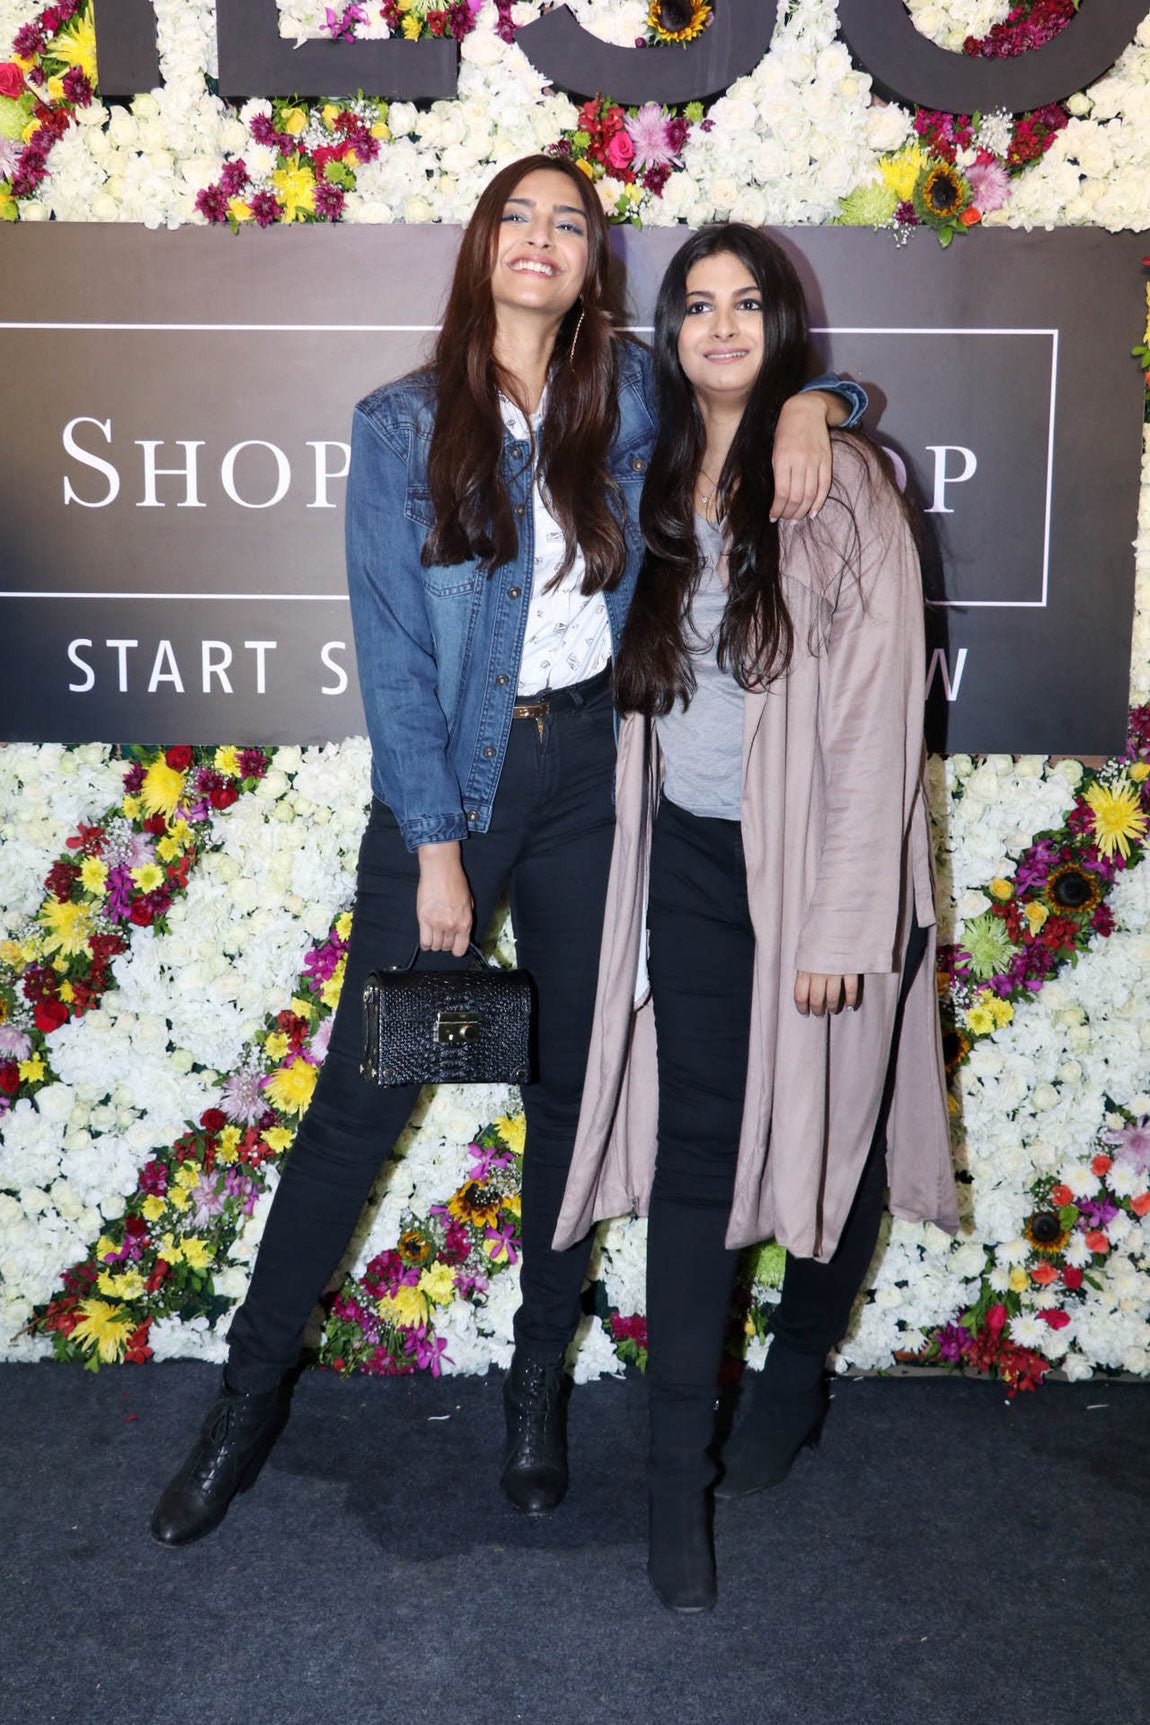 Sonam Kapoor & her Sister Rhea Kapoor at the launch of their fashion store